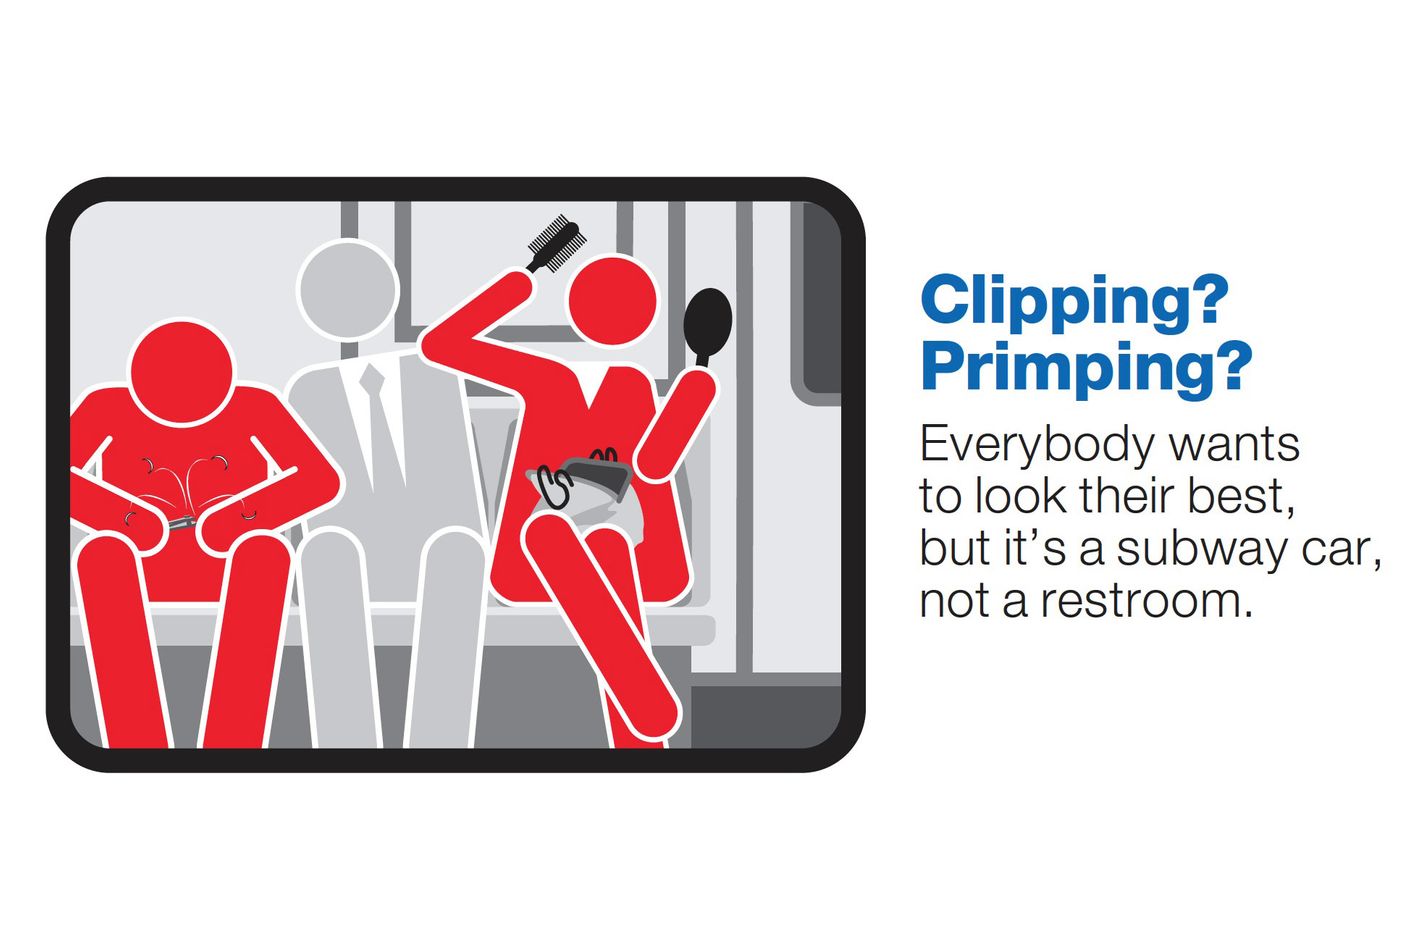 MTA ads tell New York City commuters what NOT to do on the 